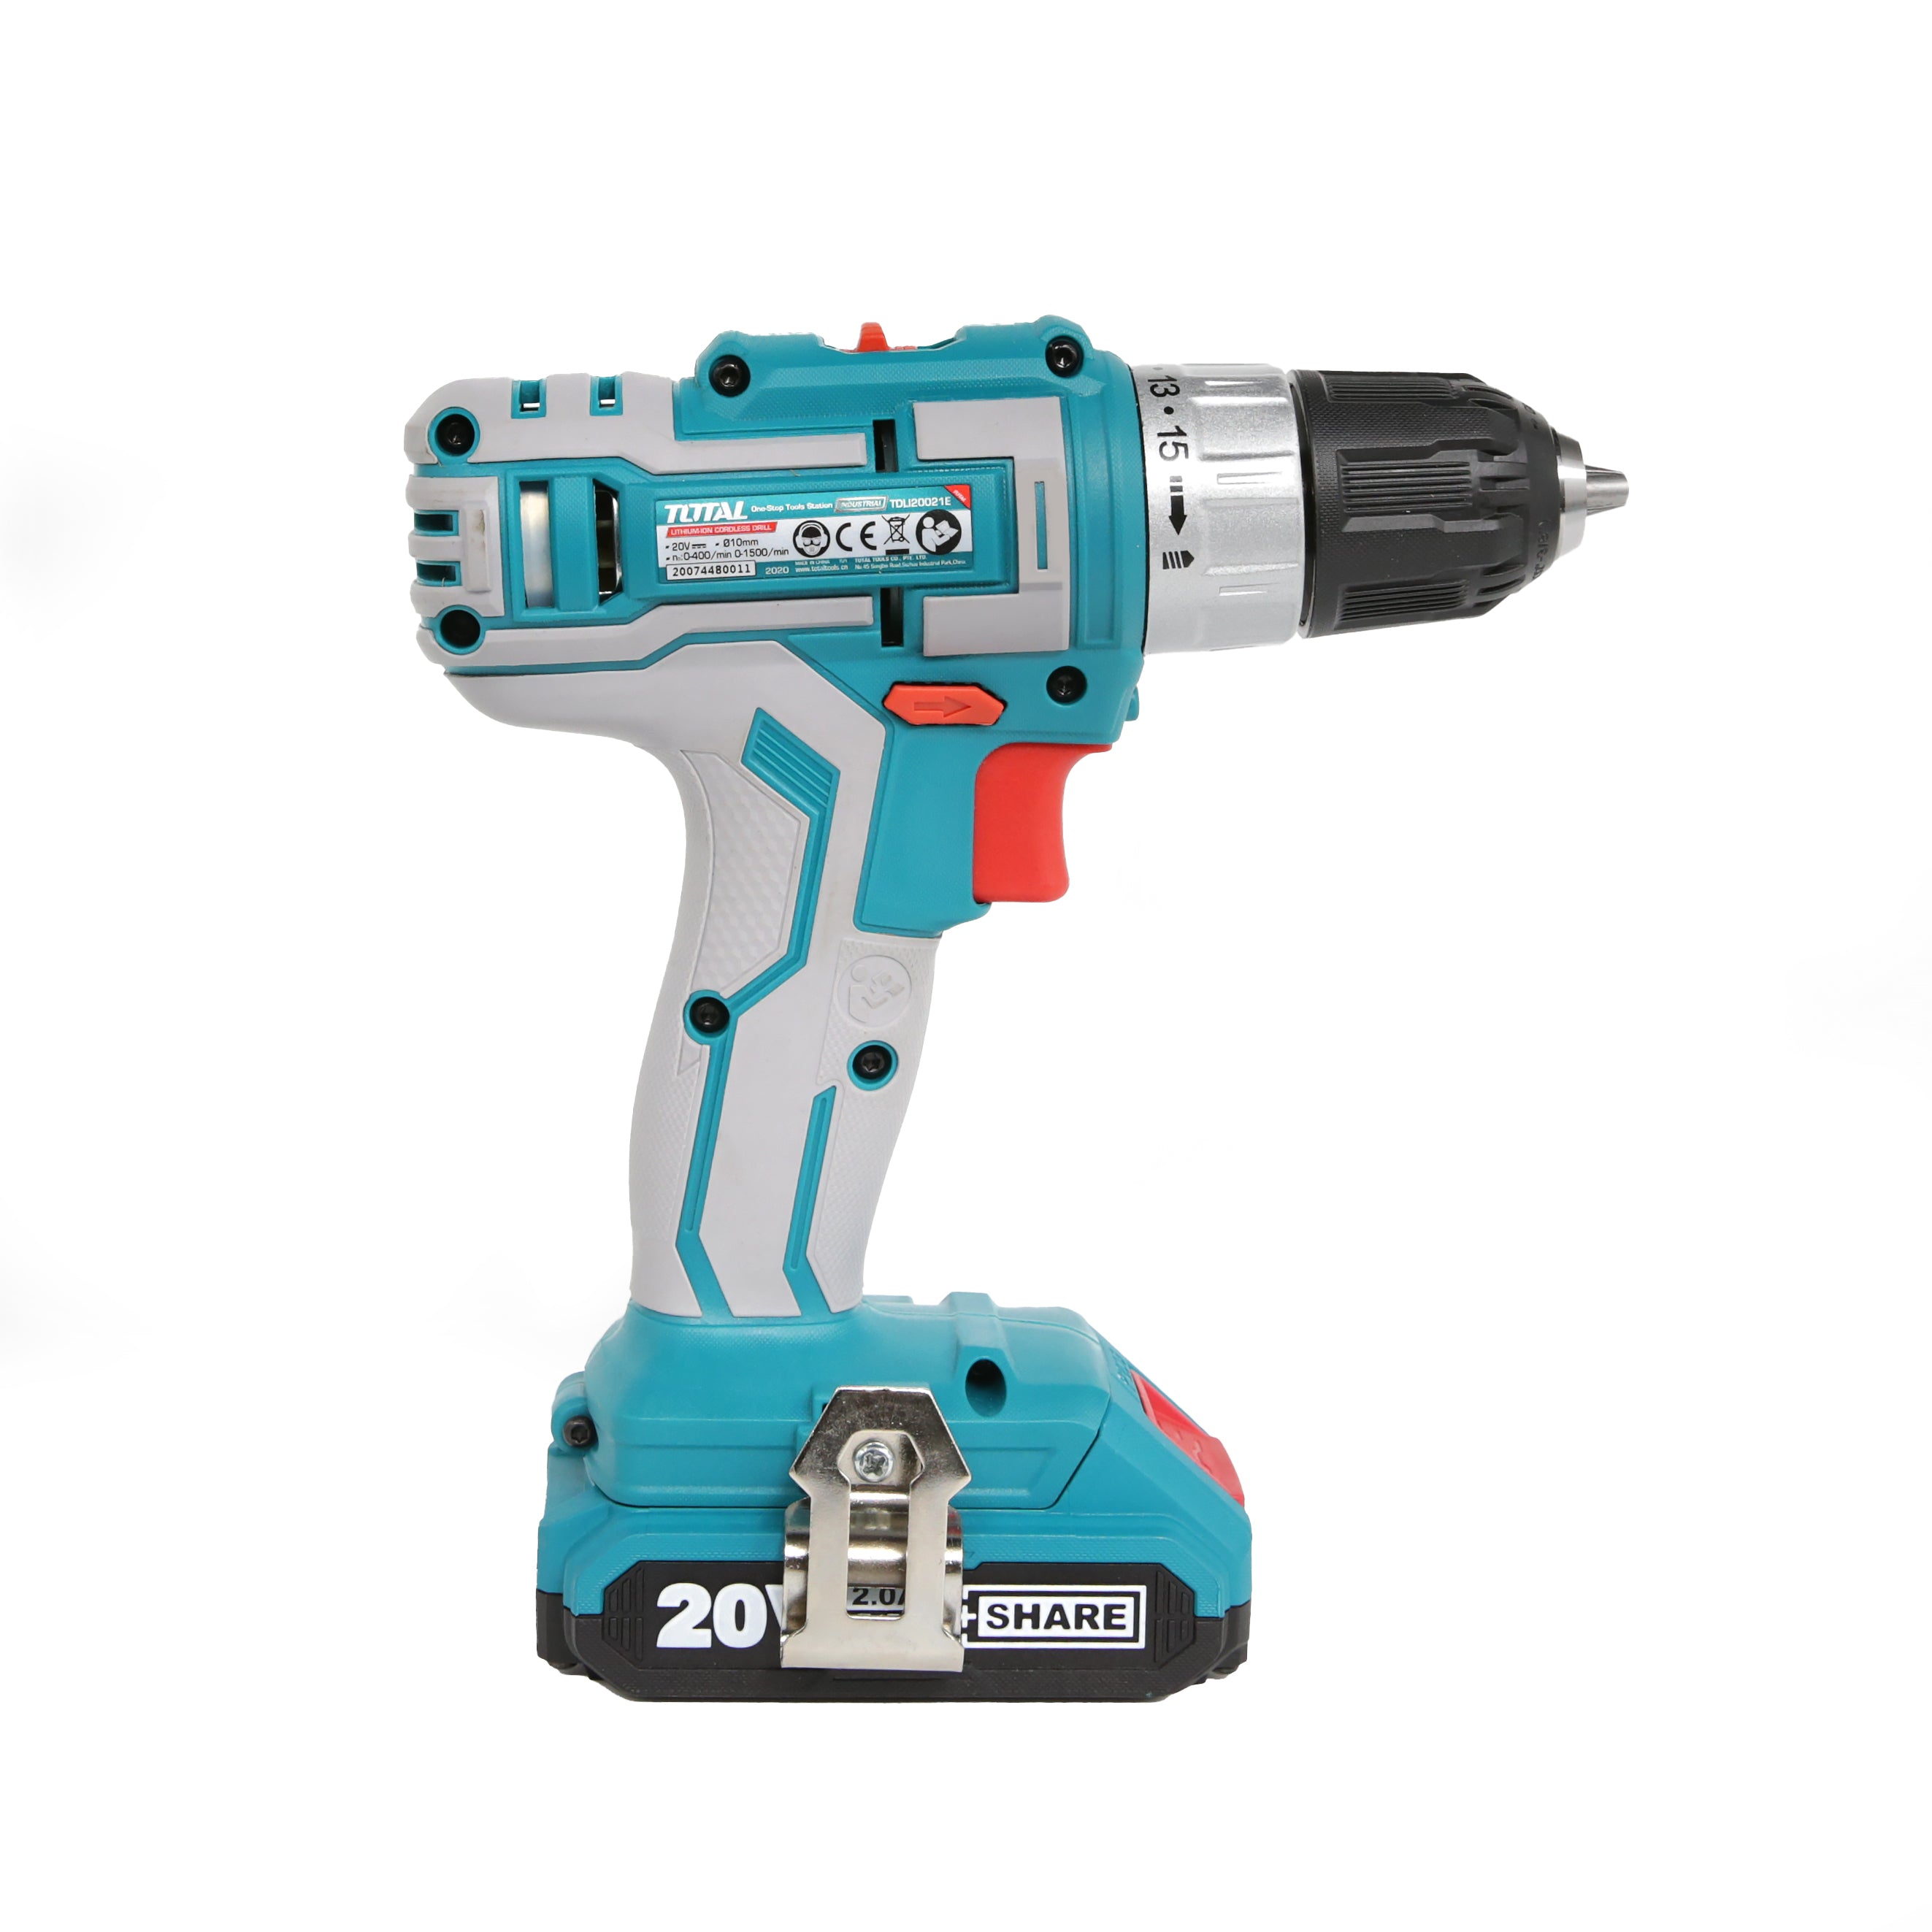 Total Li-Ion 20V Cordless Drill (with Battery & Charger) - TDLI20021E